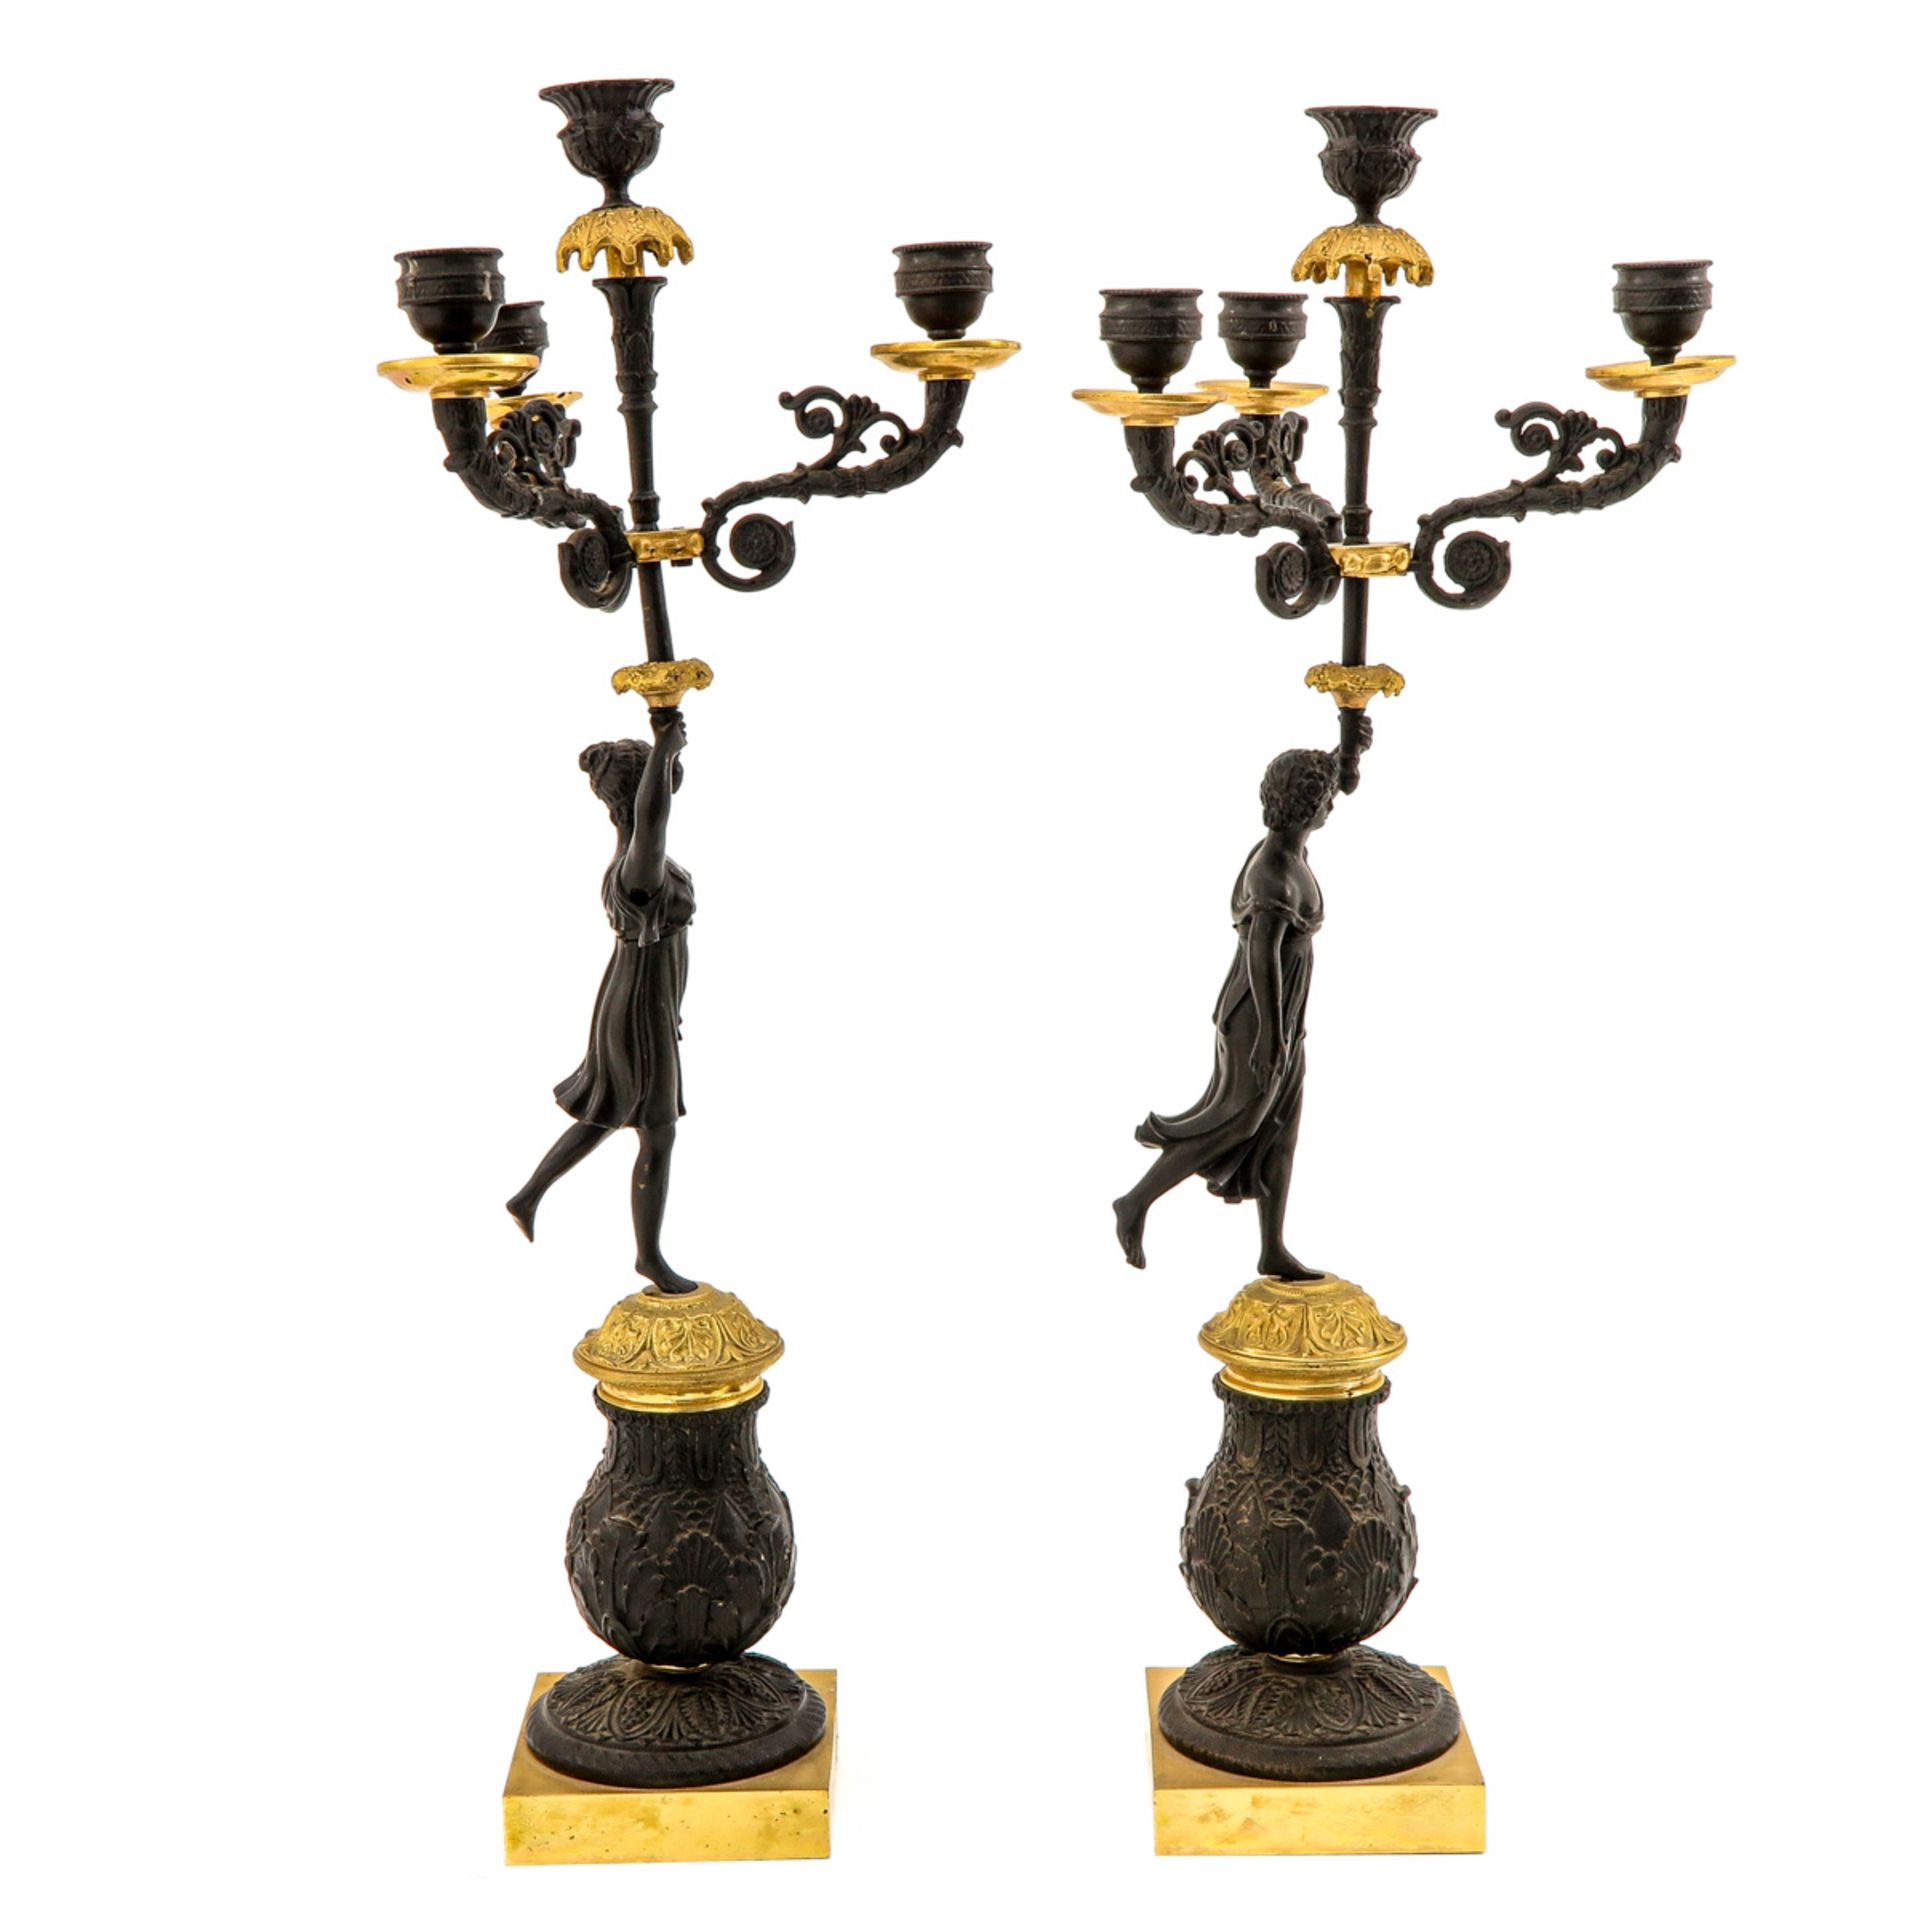 A Pair of 19th Century Candelsticks - Image 4 of 10